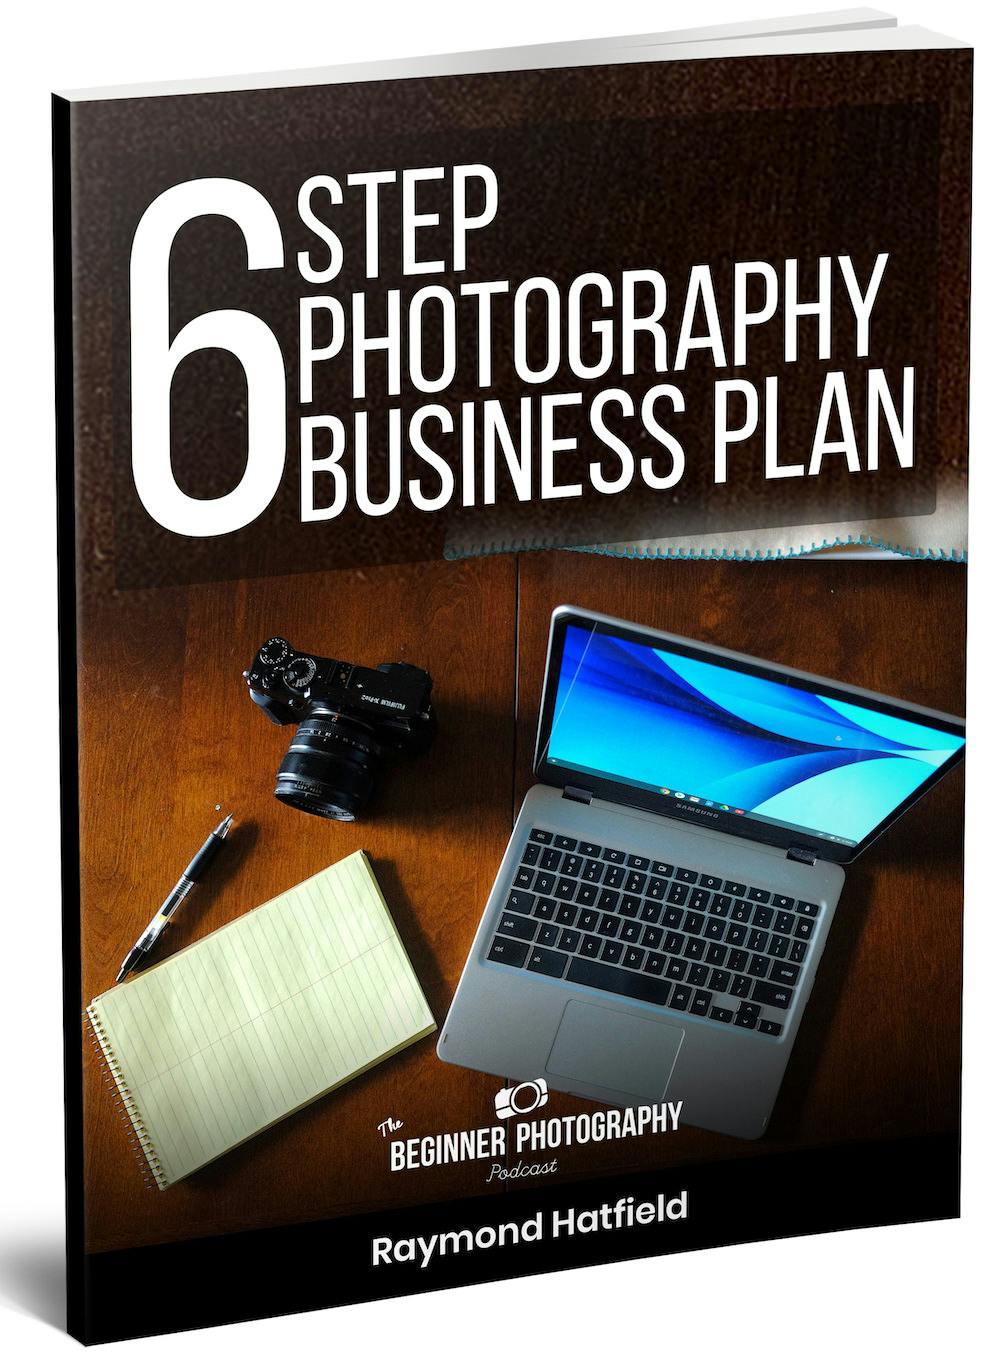 keys to success in photography business plan